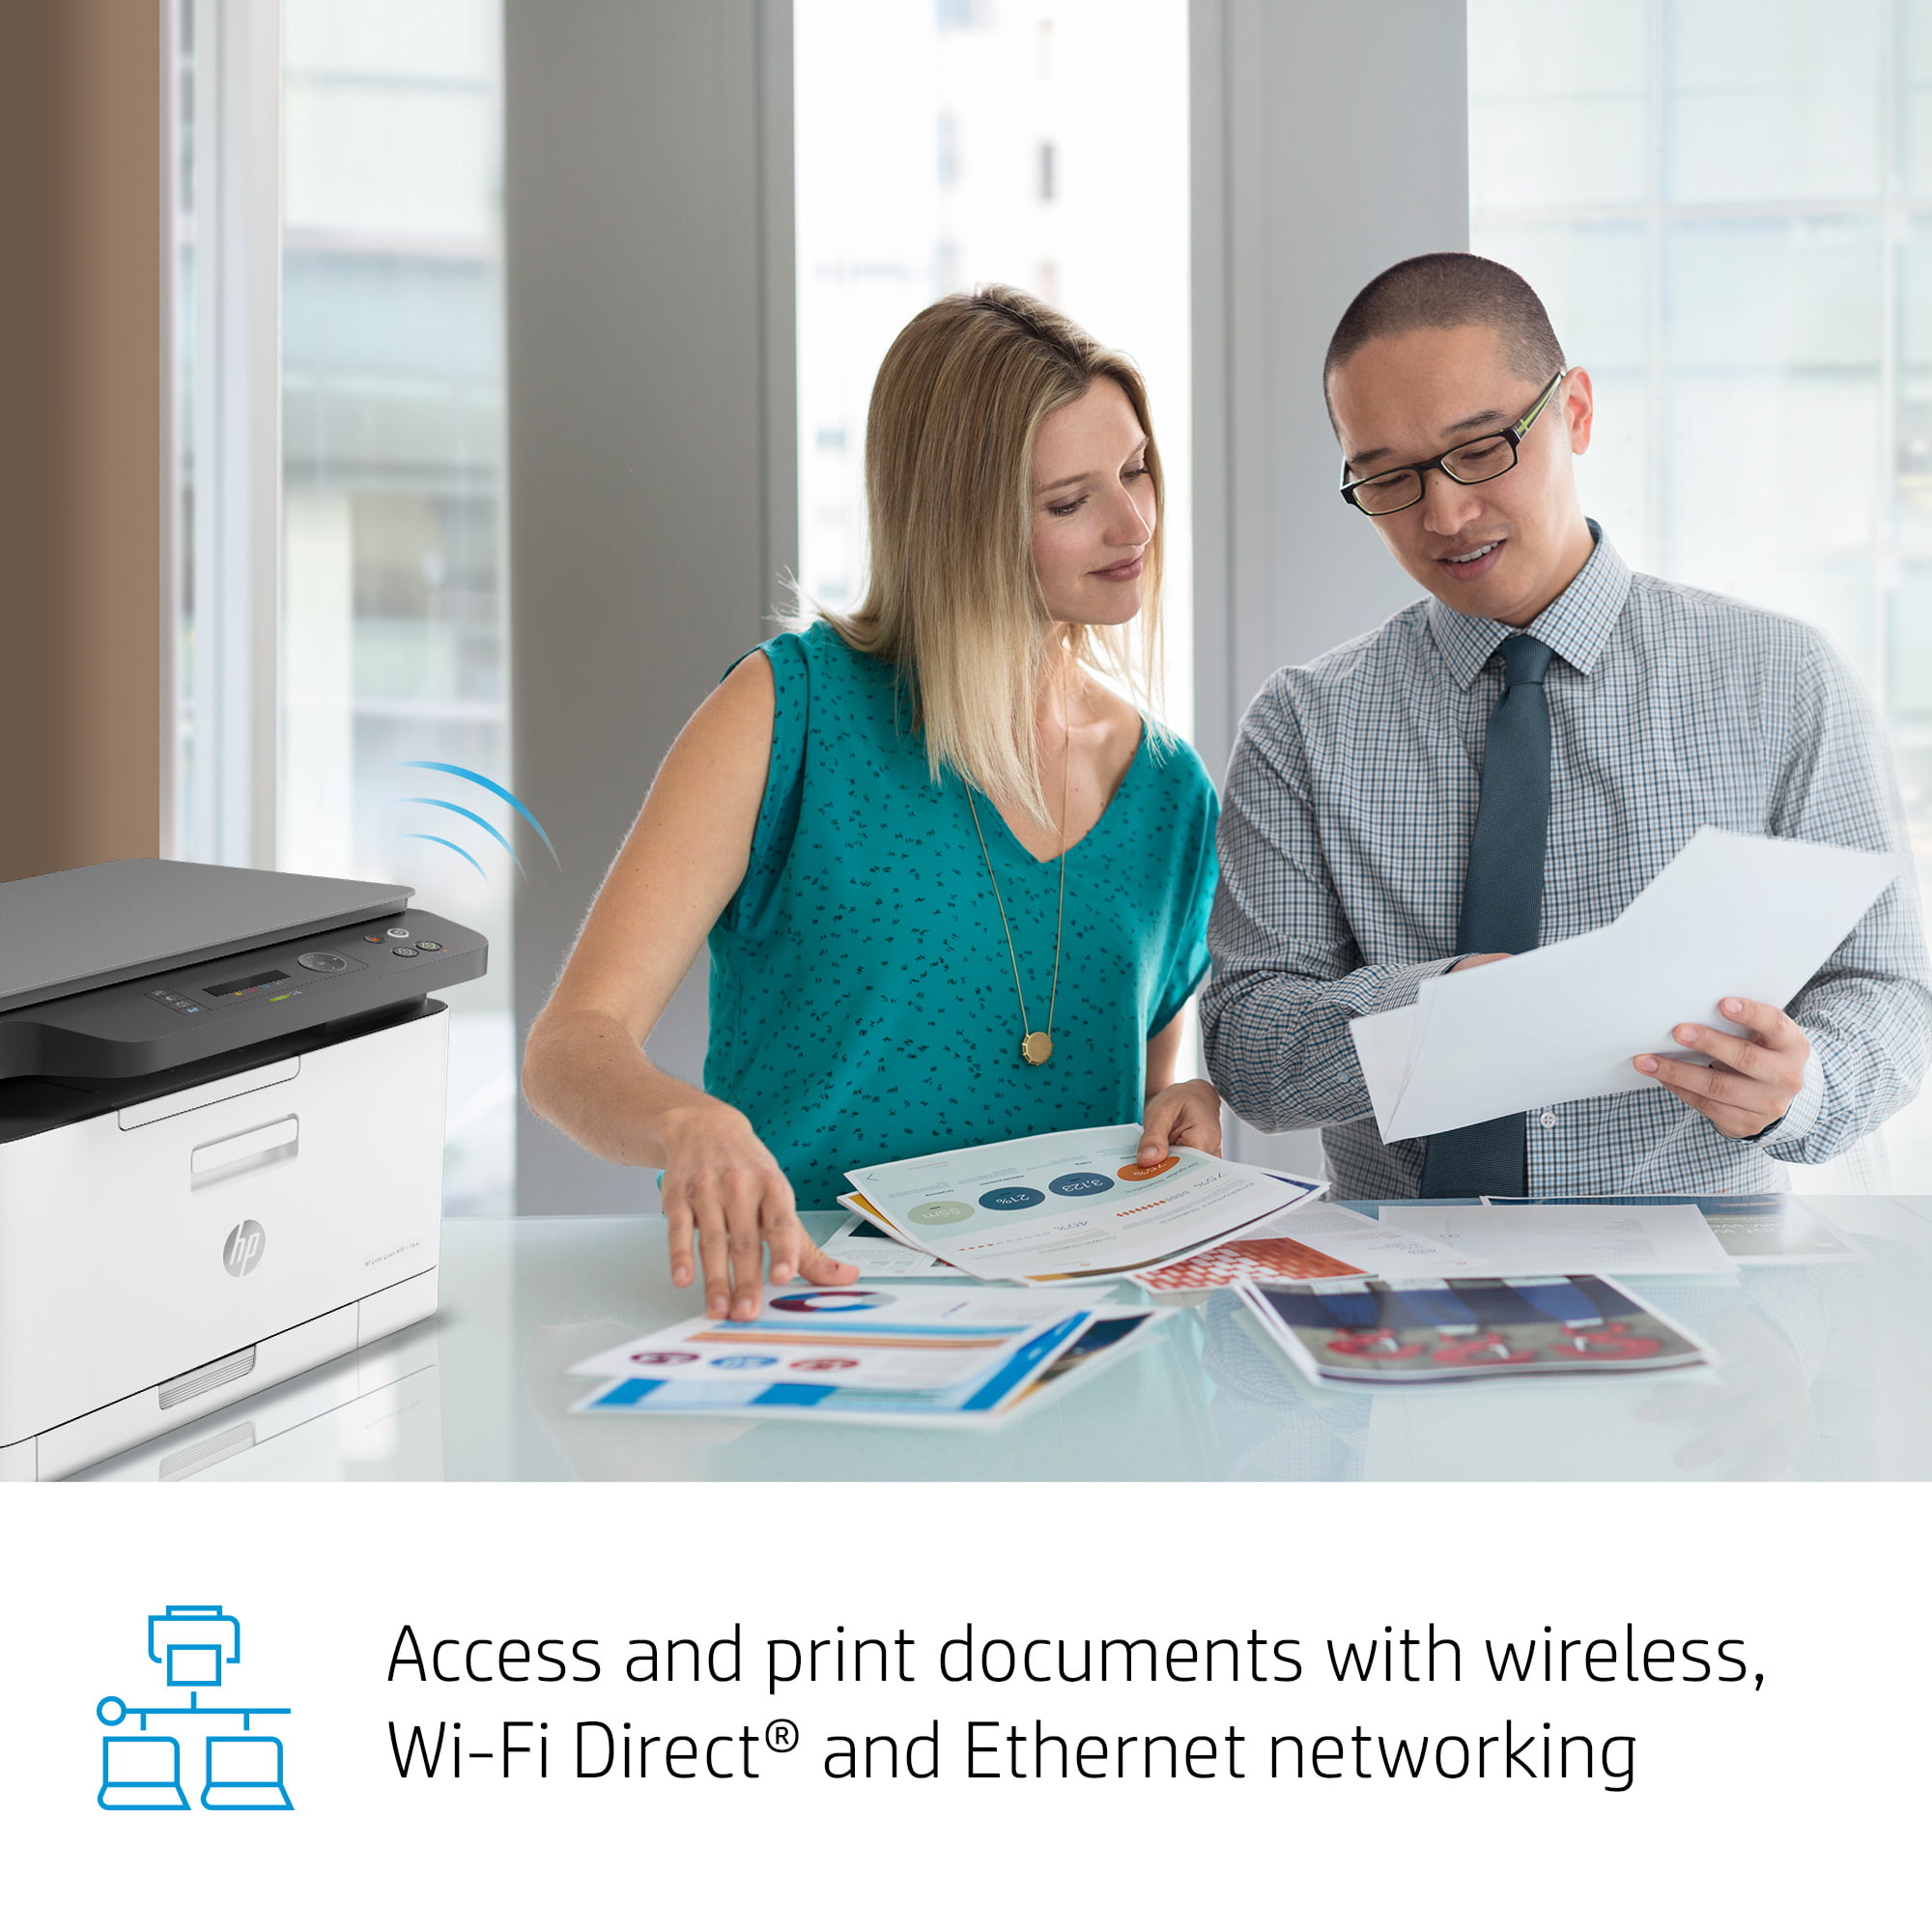 HP MFP 178nw Wireless All-in-One Color Laser Printer (4ZB96A